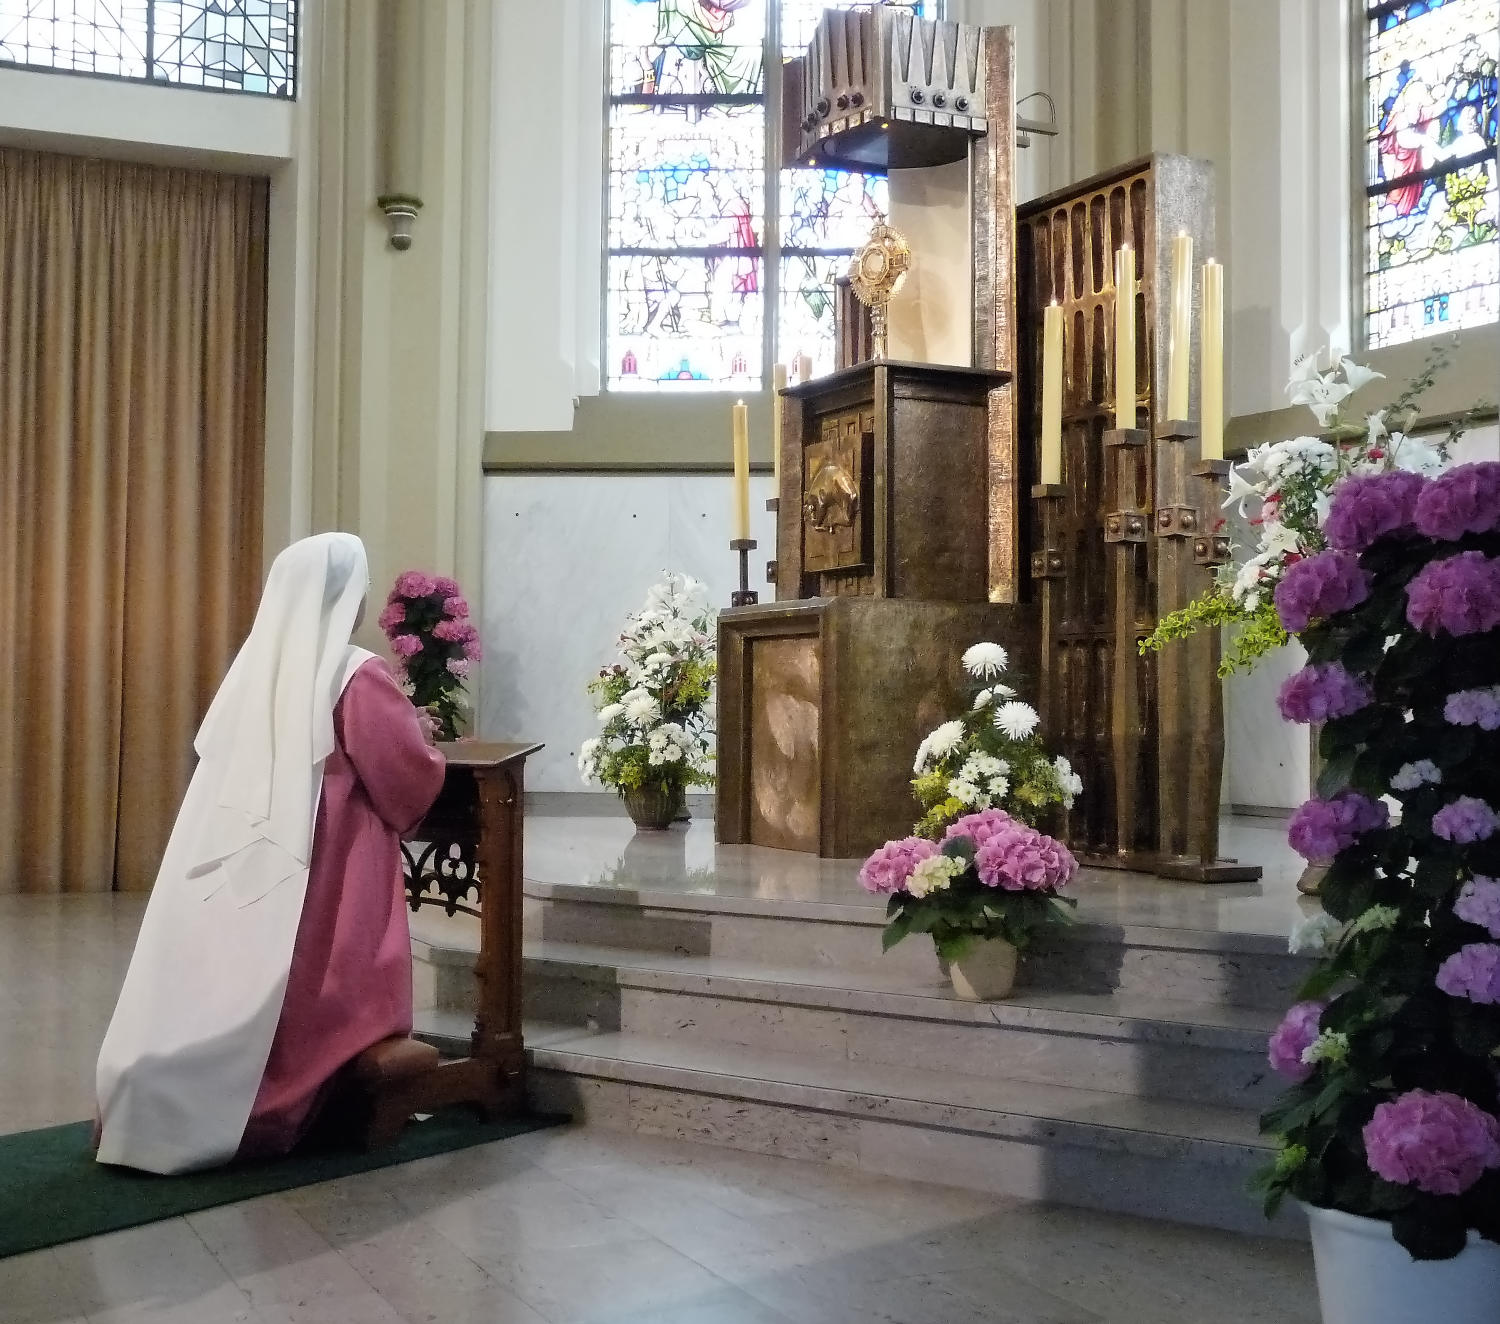 Sister of Perpetual Adoration before Jesus in the Eucharist